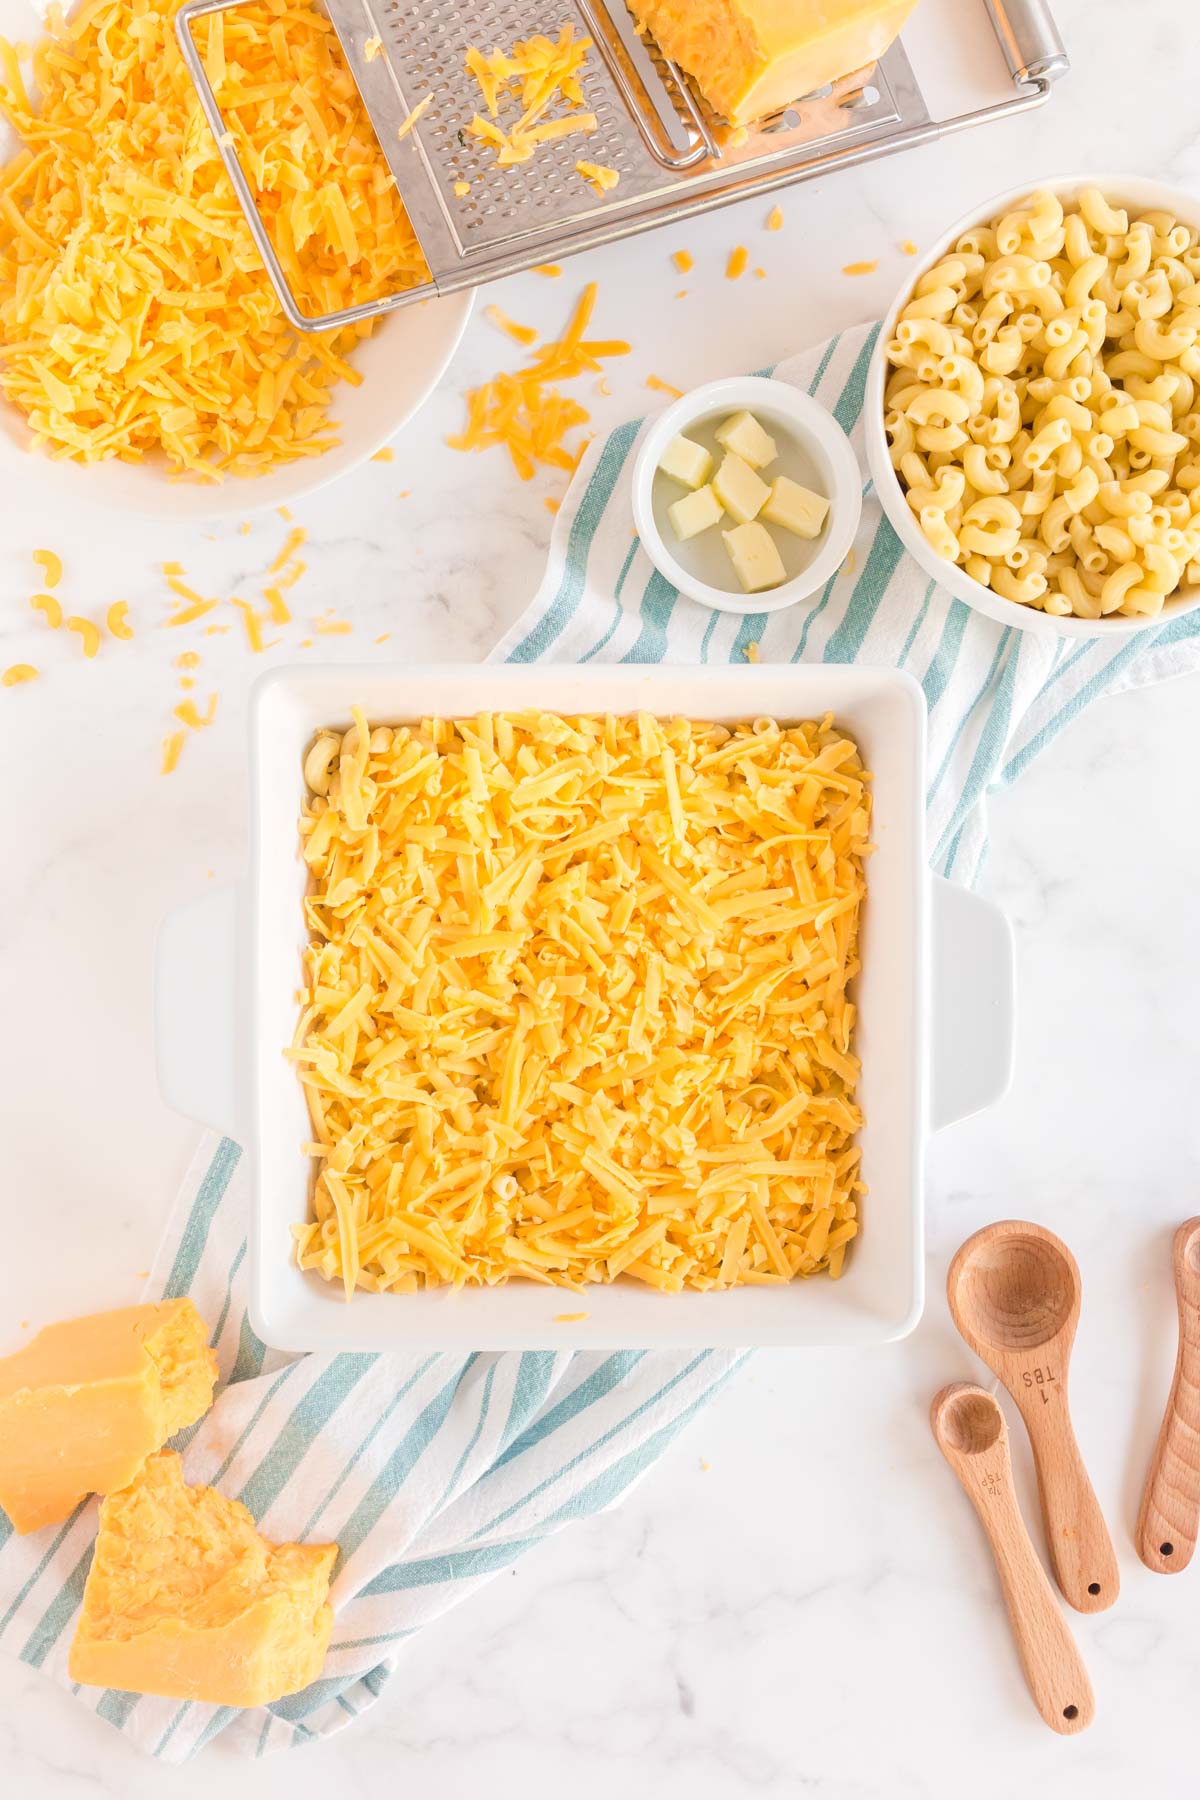 Shredded cheese on top of macaroni in a white baking dish